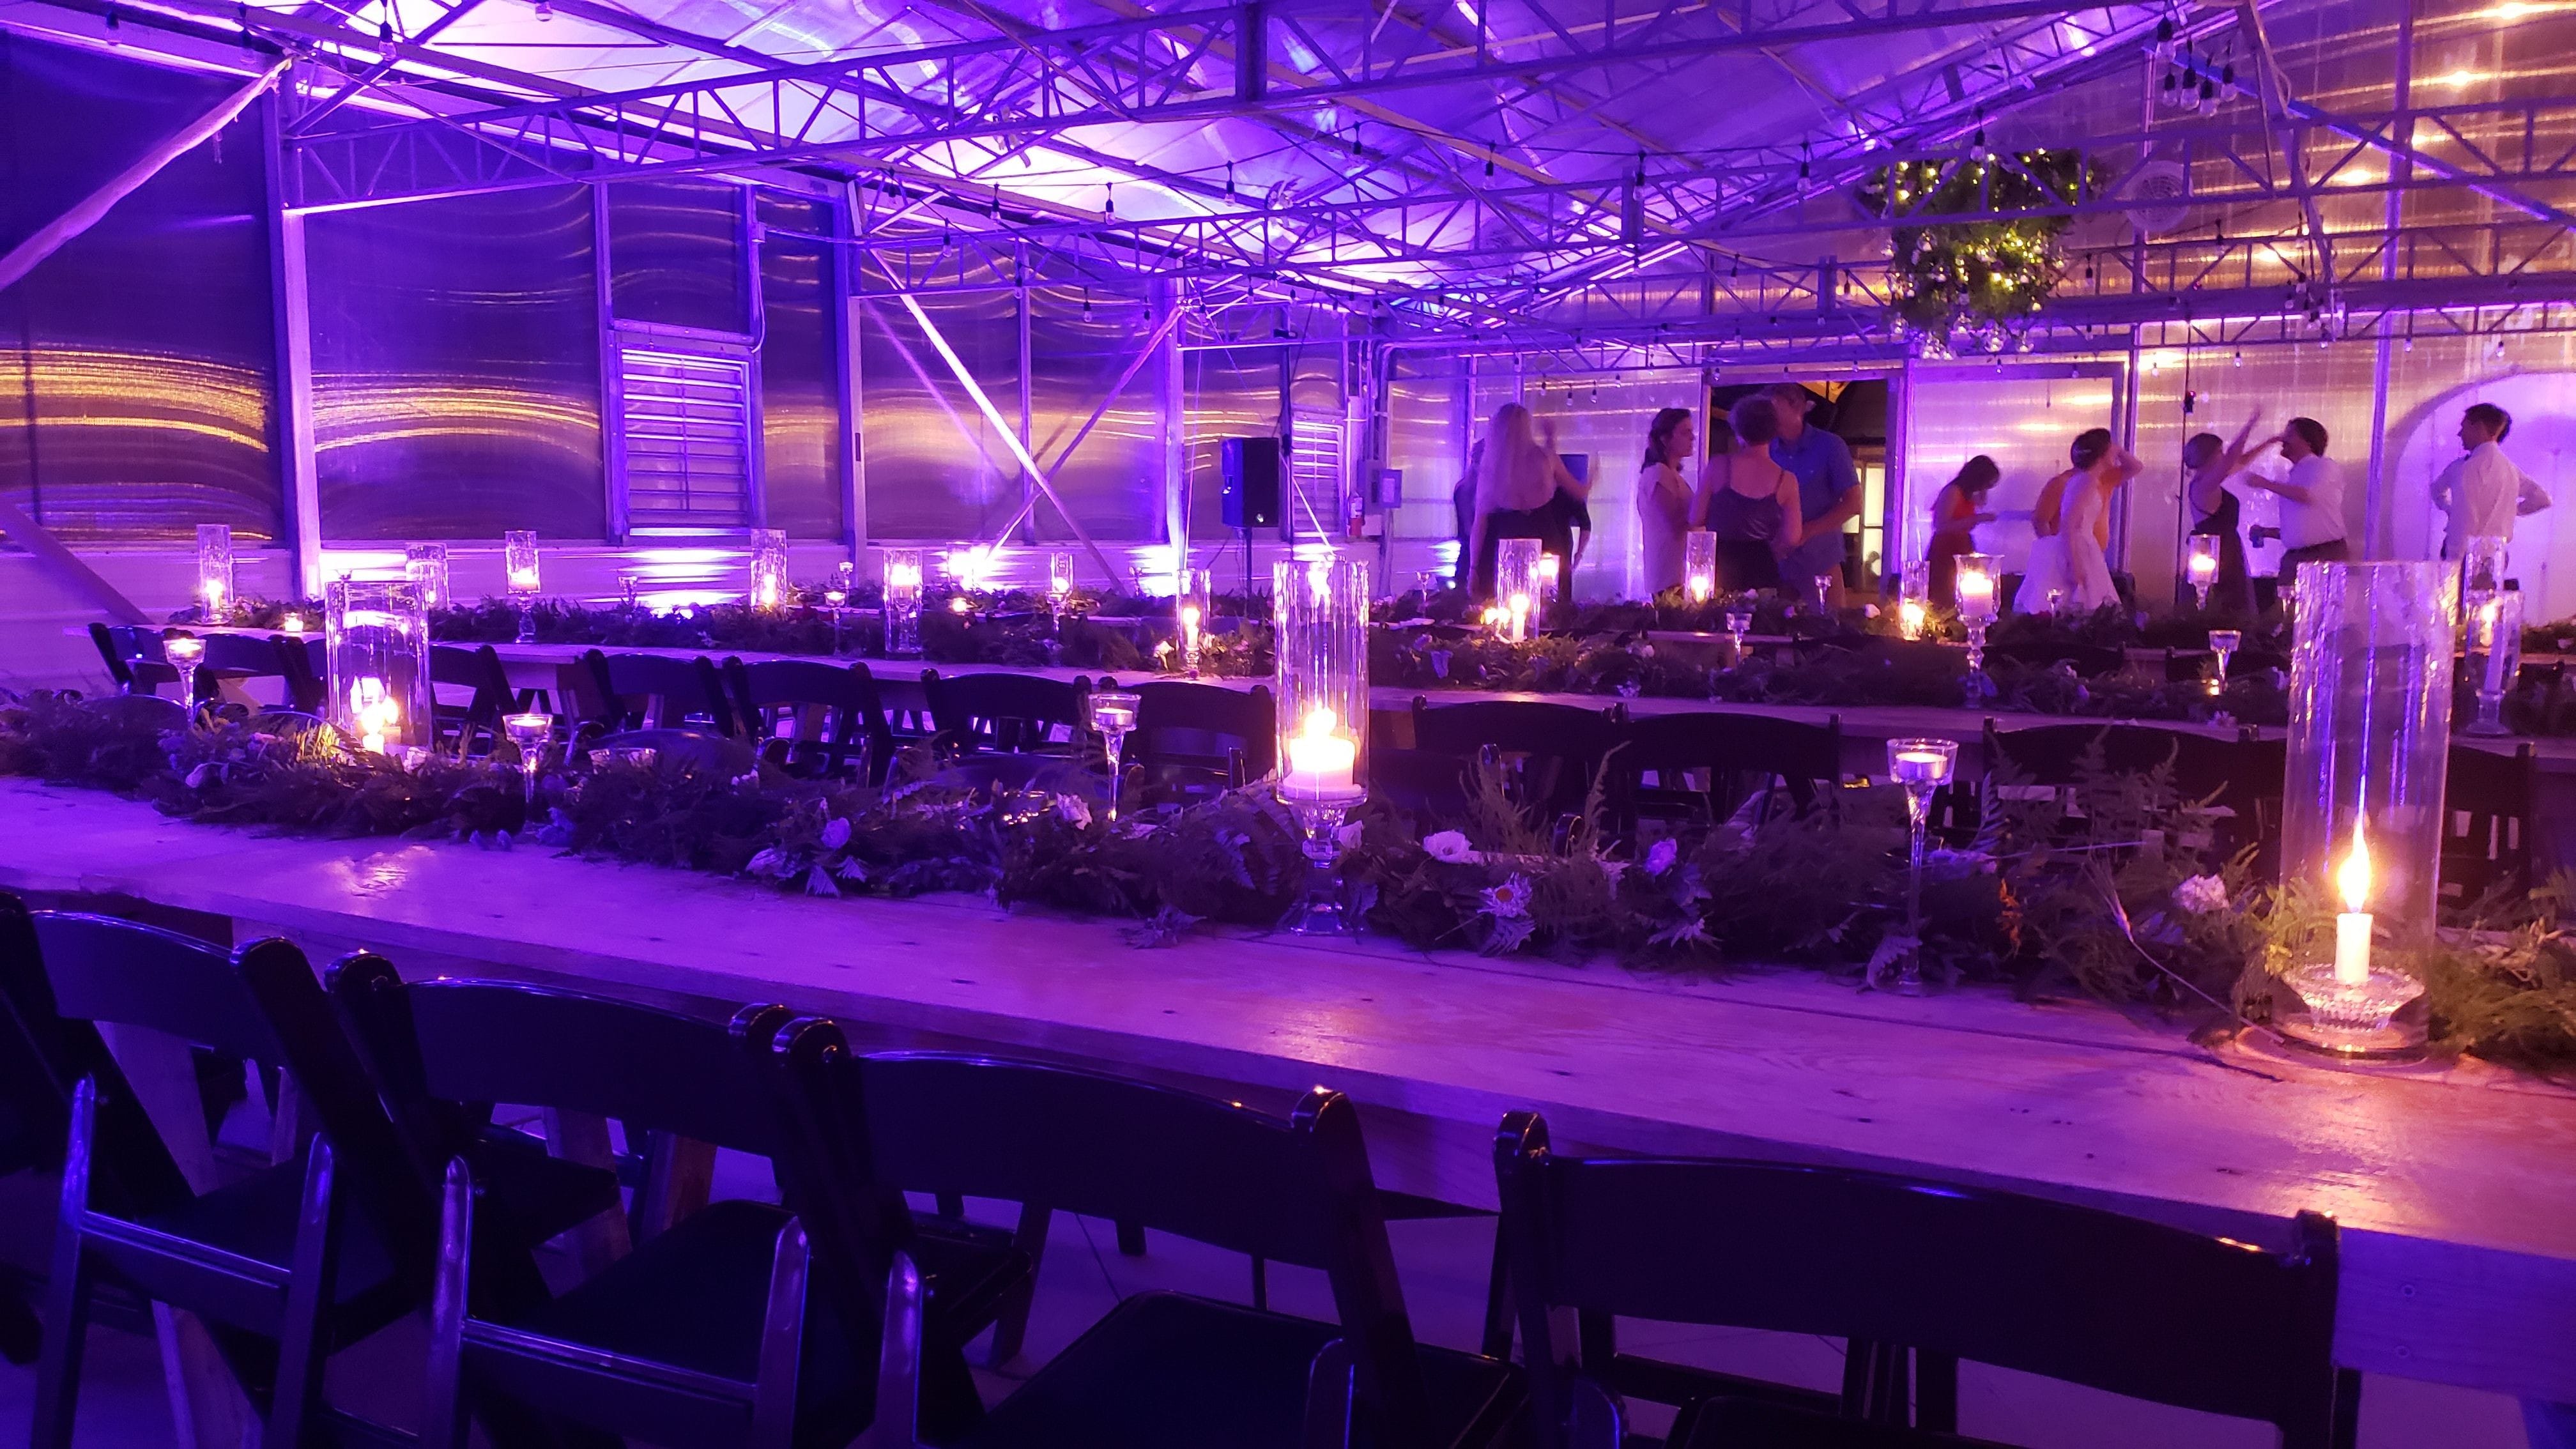 Wedding lighting by Duluth Event Lighting at the Atrium. Up lighting in purple.